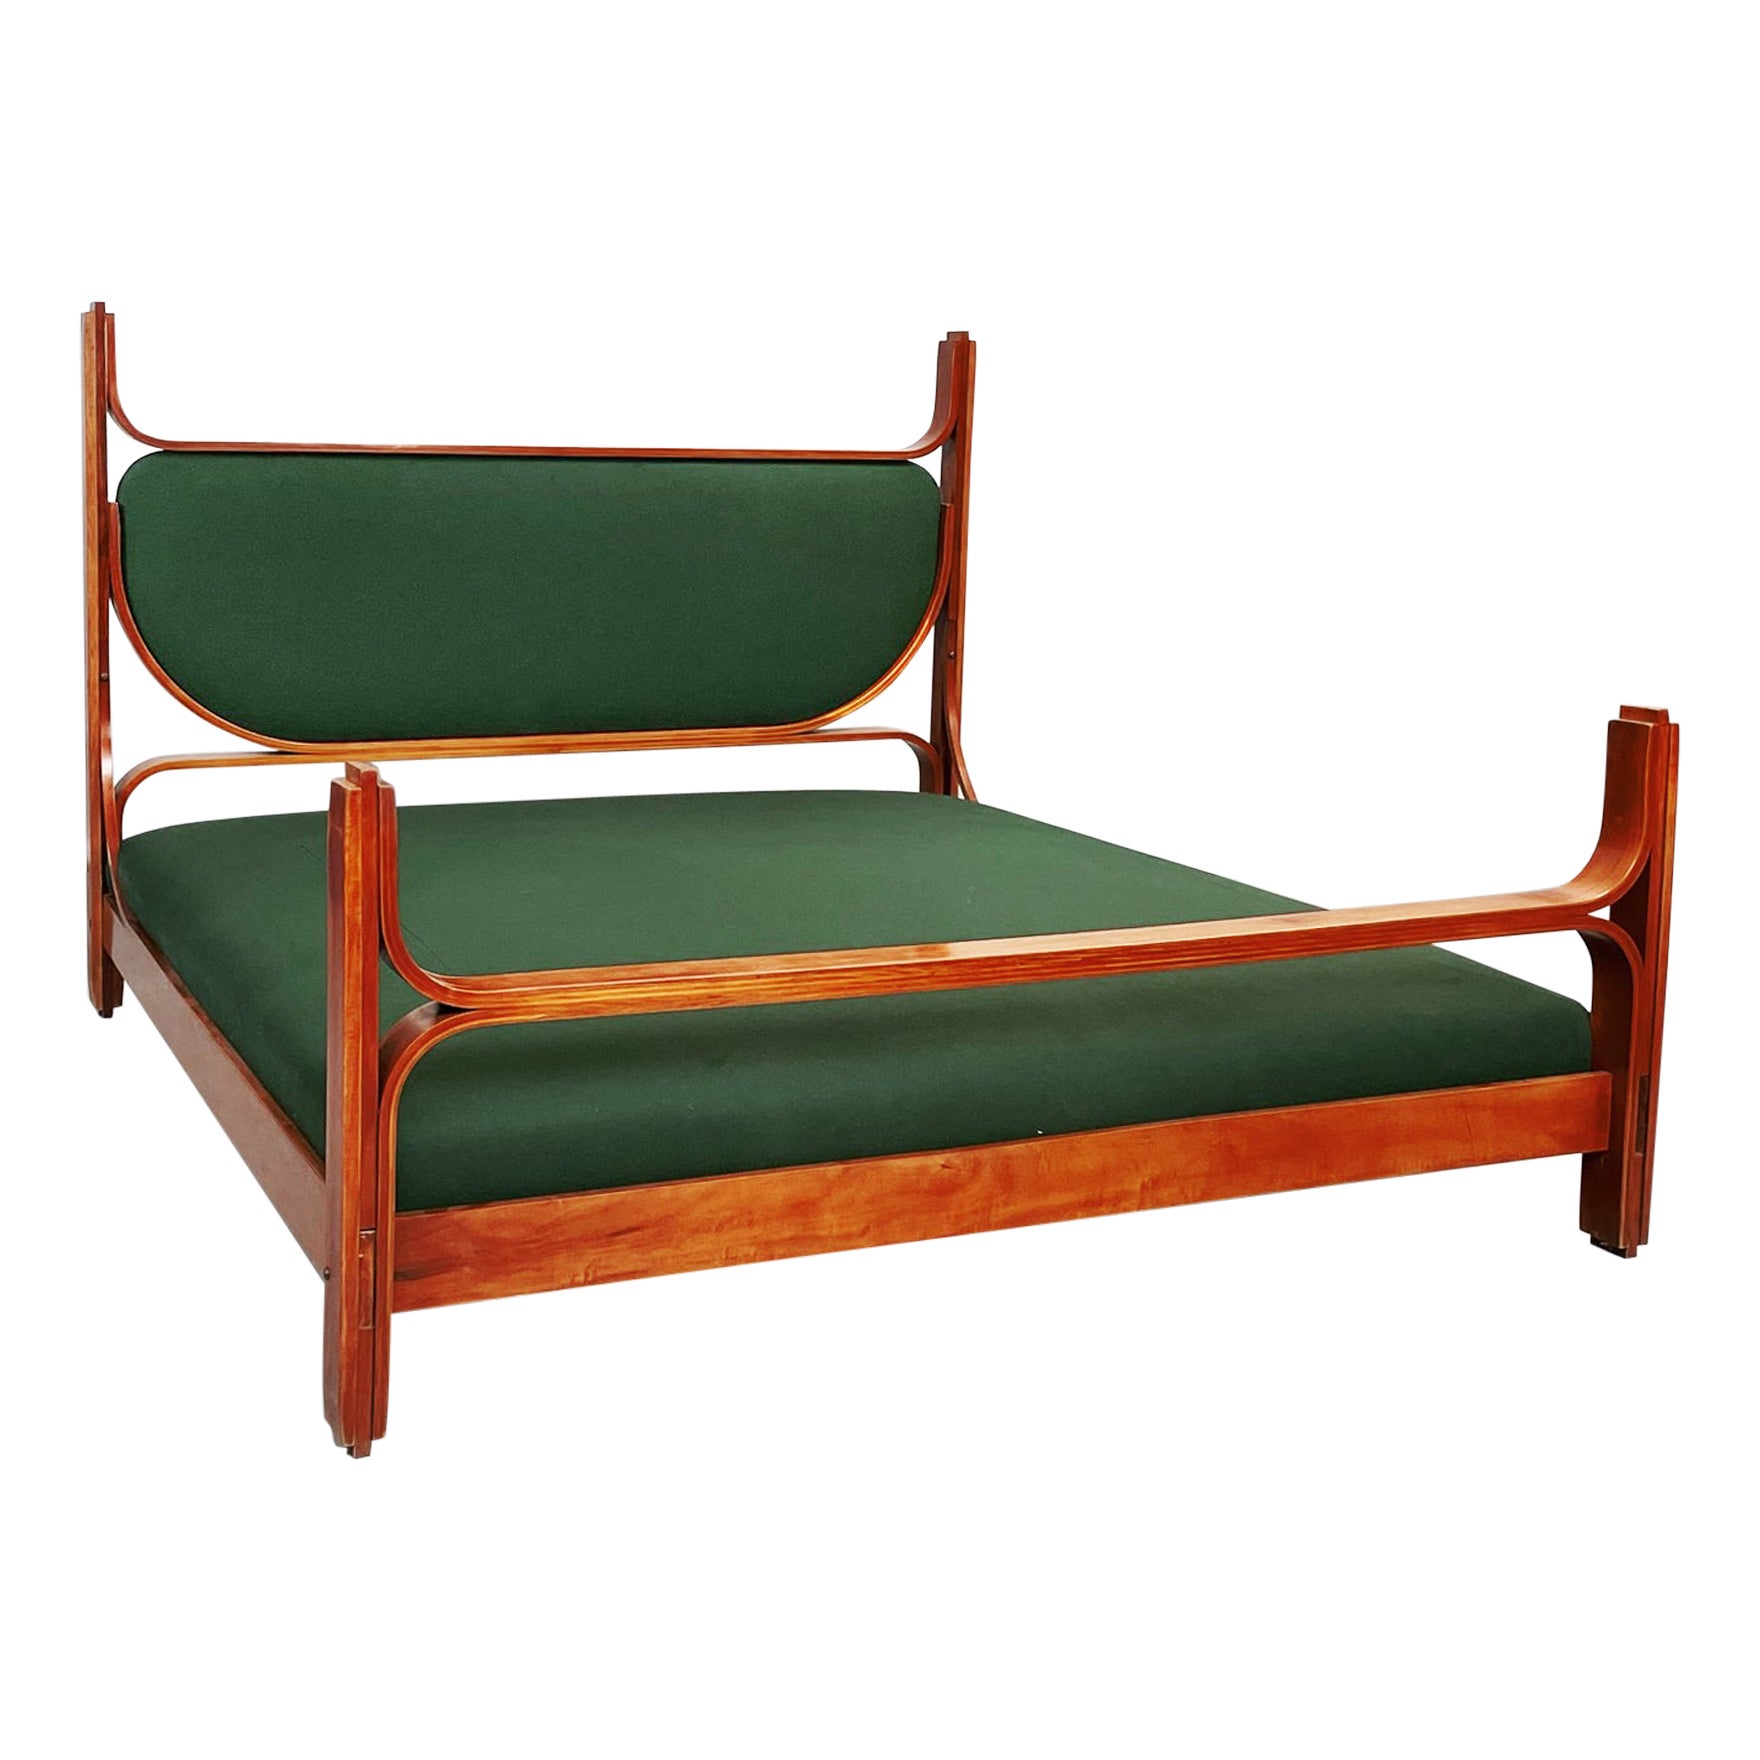 Italian midcentury Wooden and green fabric double bed L12 by Fulvio Raboni, 1959